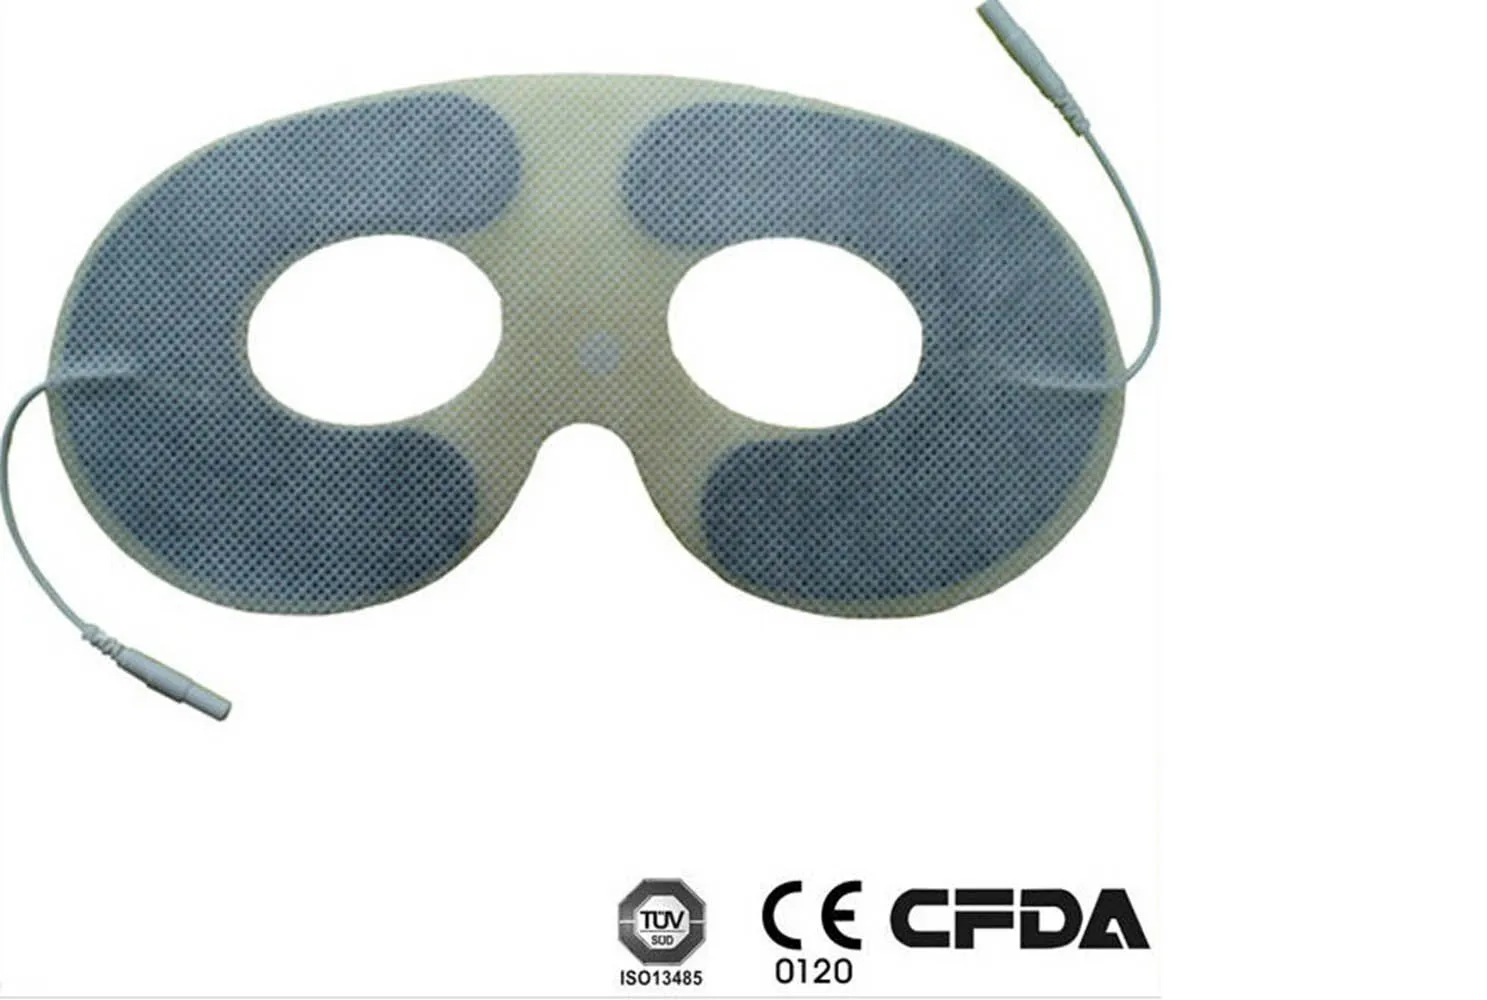 High Quality Premium Non-woven Face Shape Eye/Head Massage Electrode Pads for Tens/ems Unit with Button,FDA Cleared